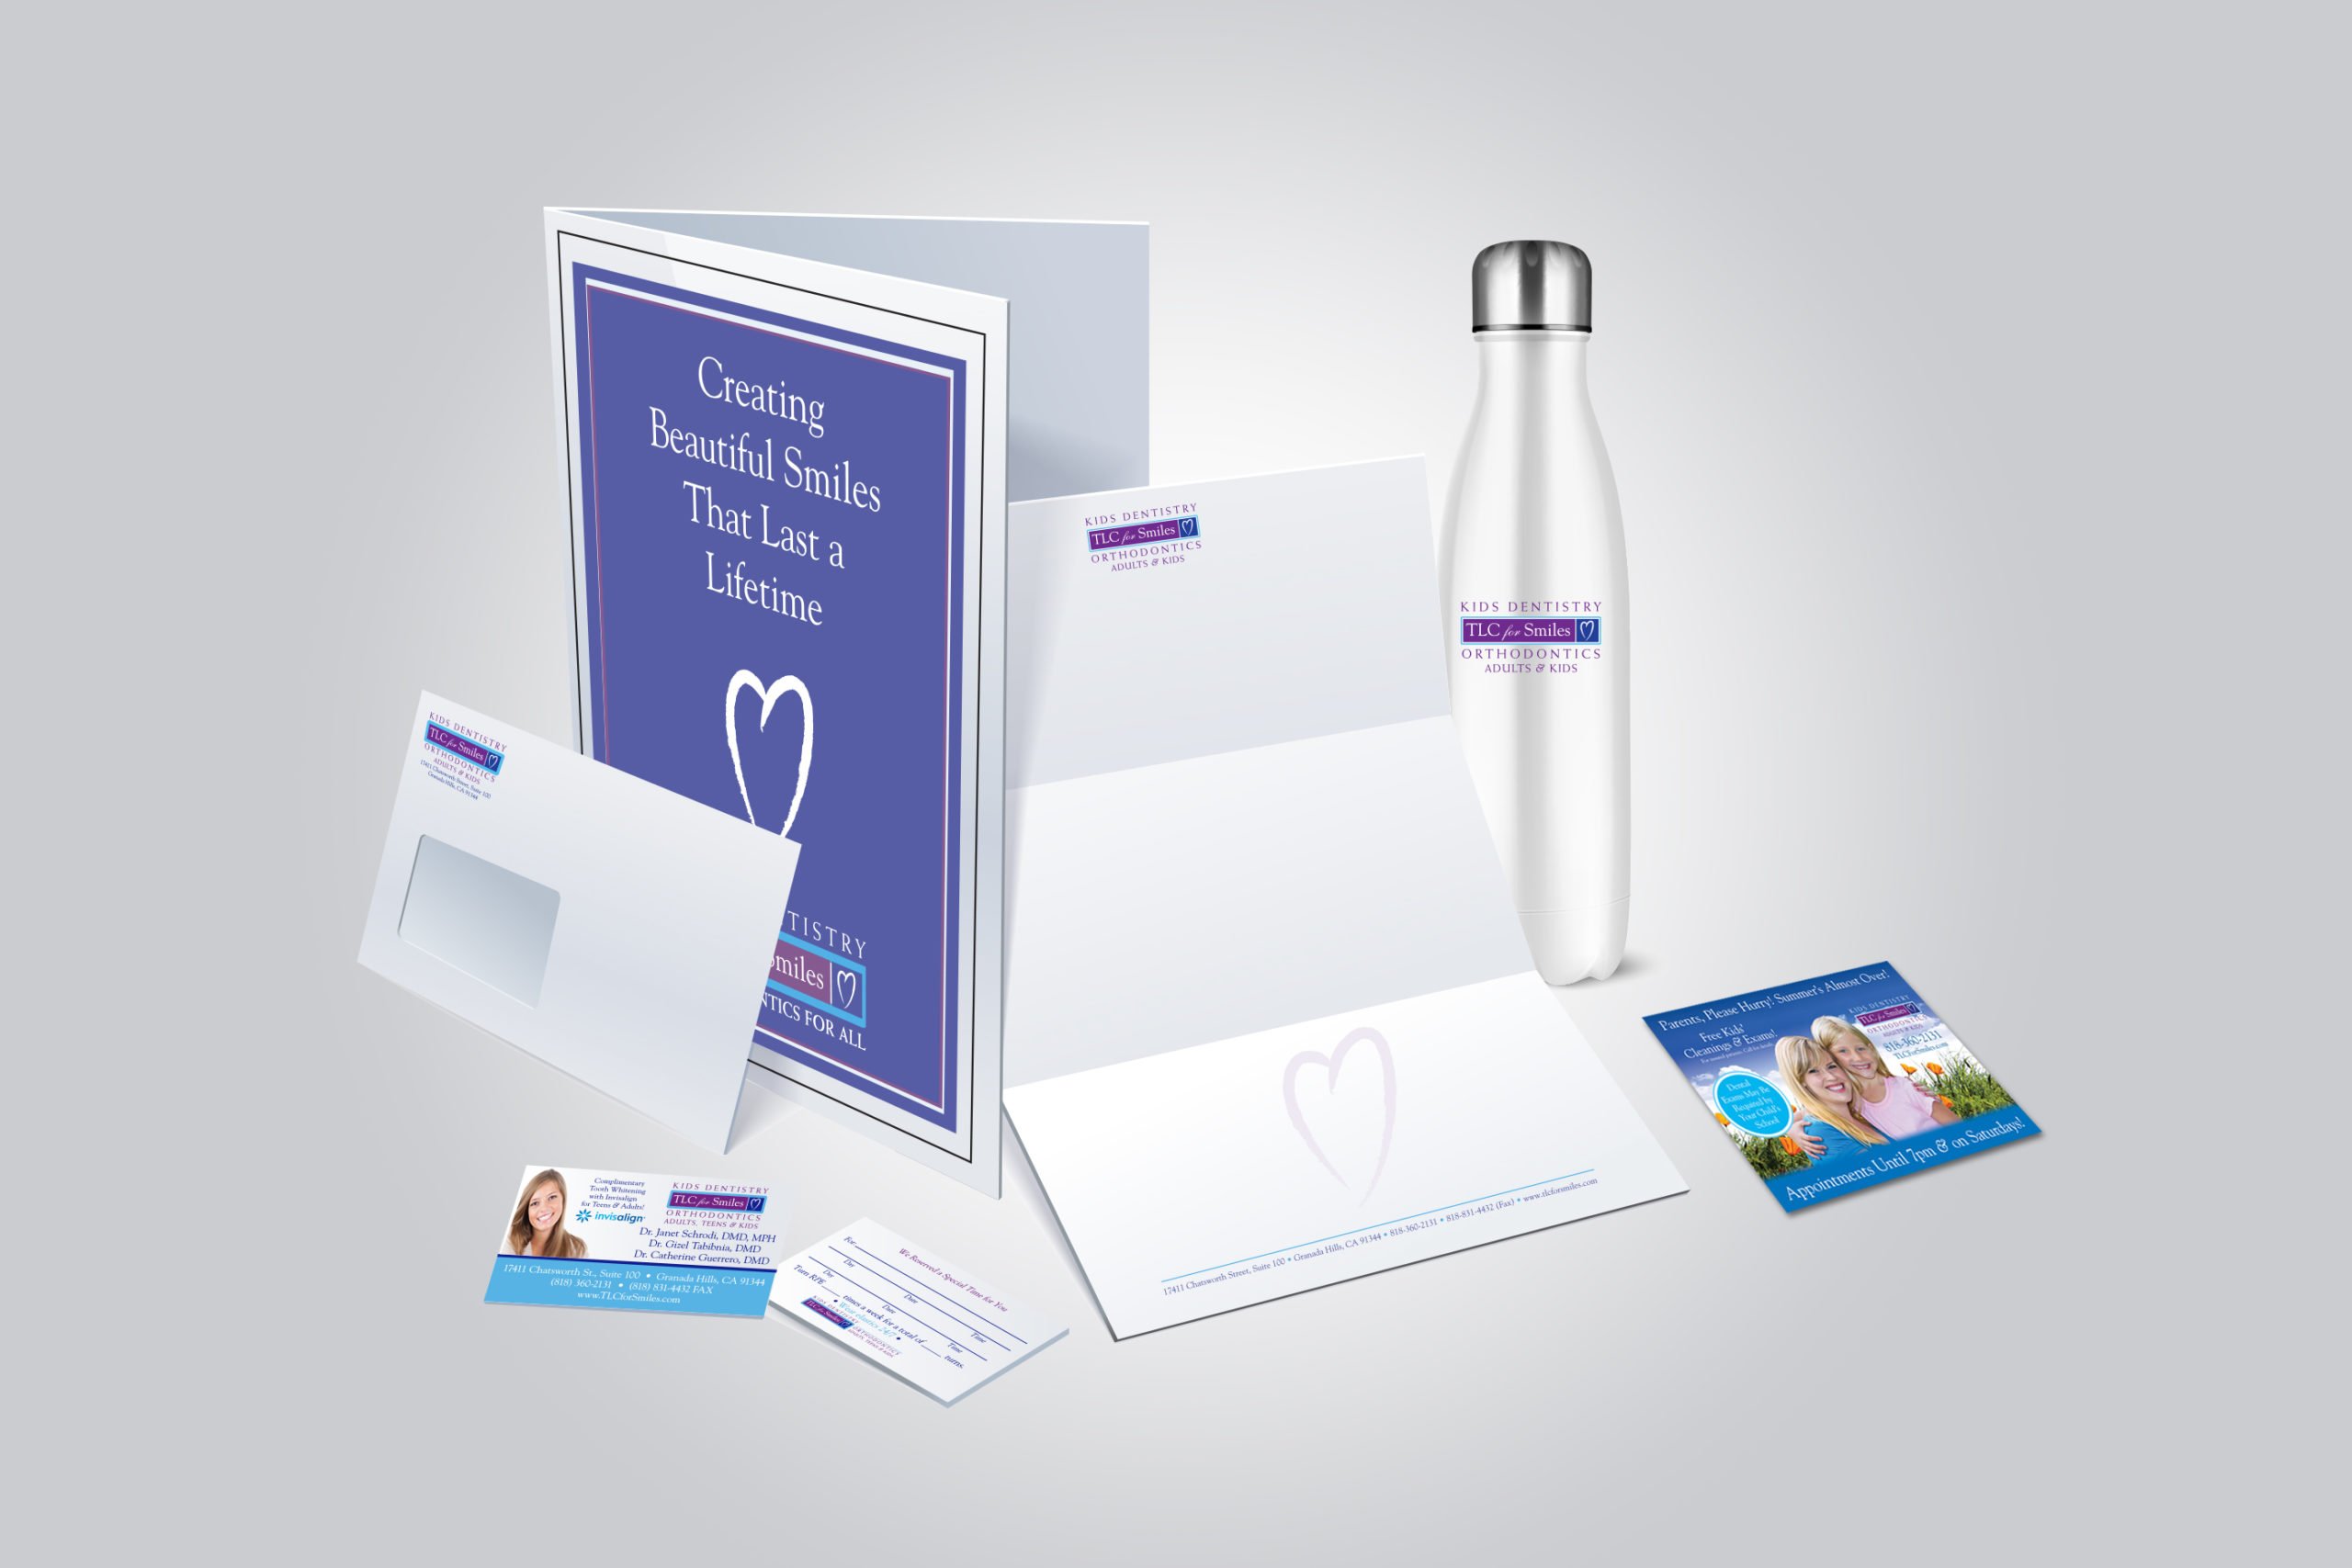 Kids Dentistry TLC for Smiles Stationery & Promotional Items